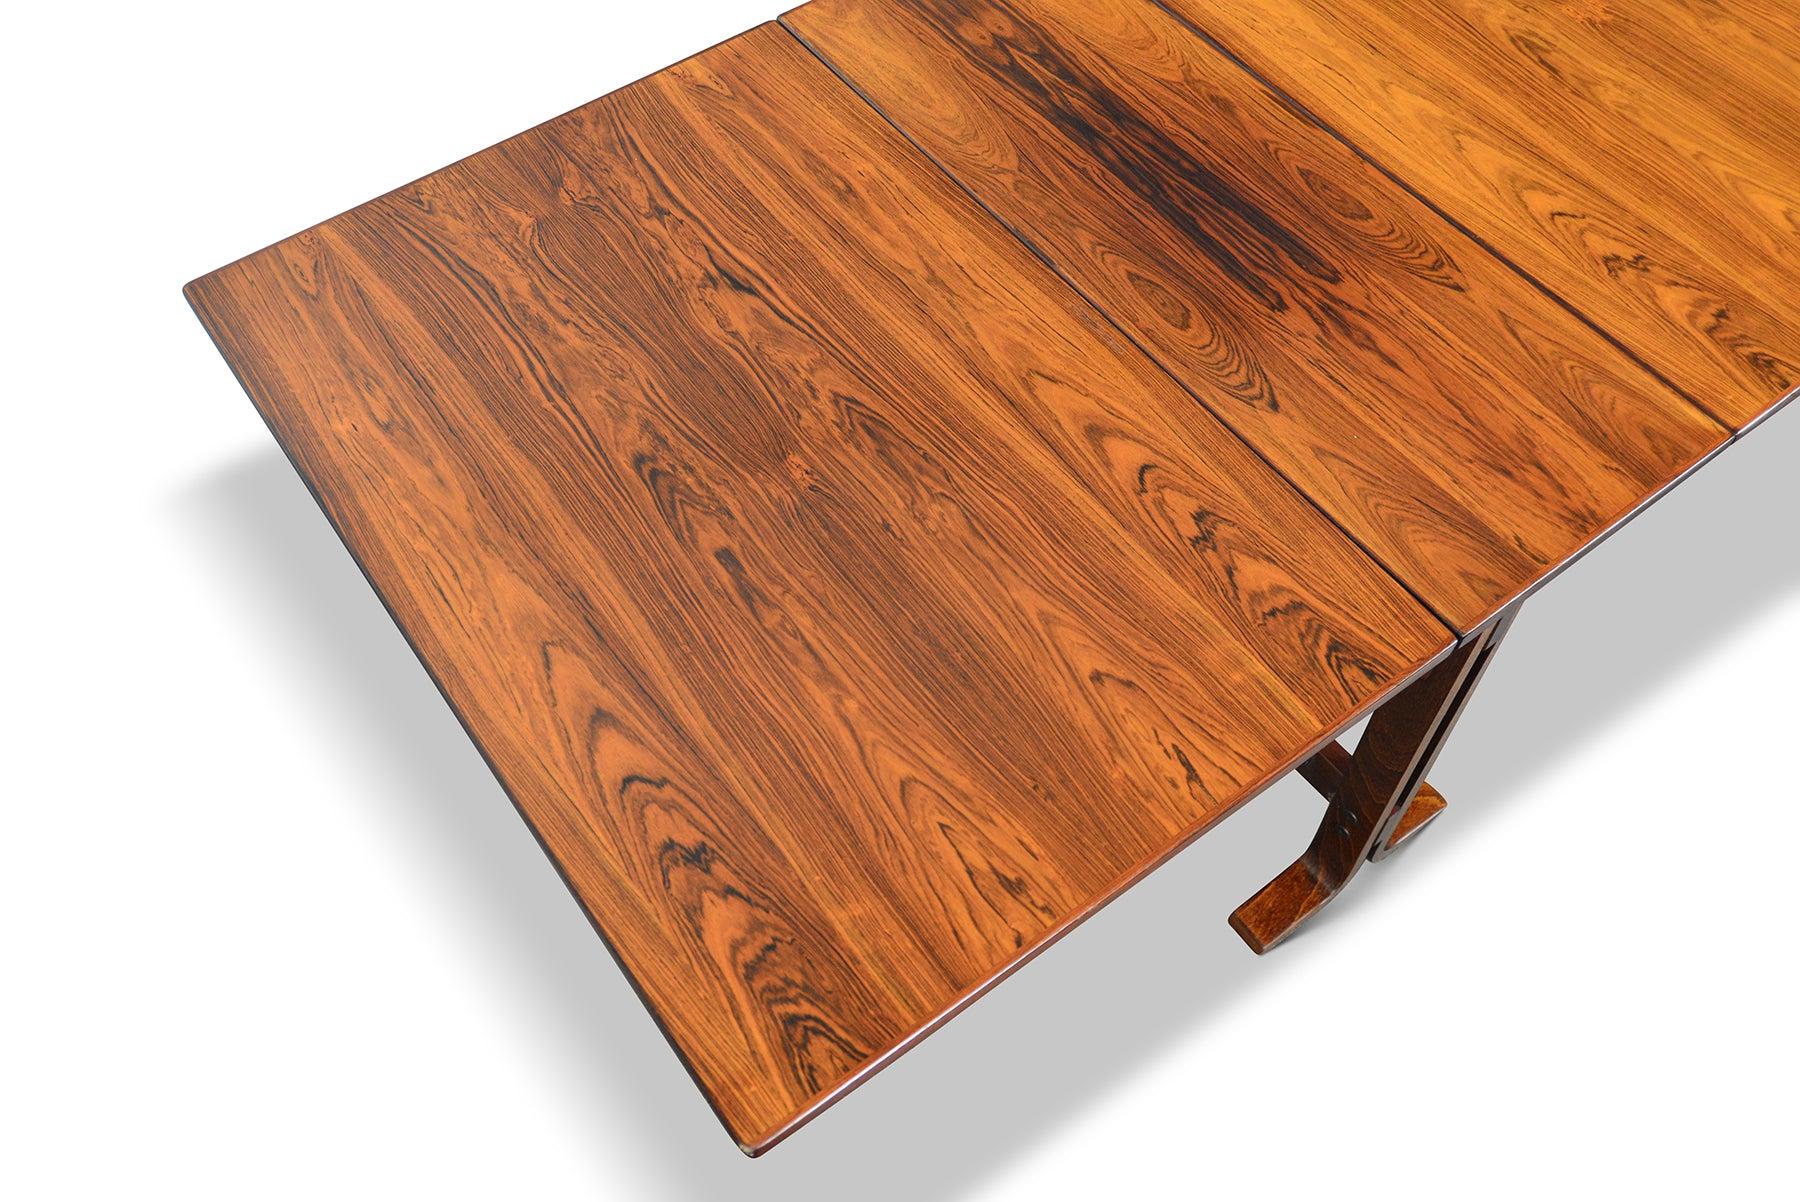 Drop Leaf Dining Table In Rosewood #1 2